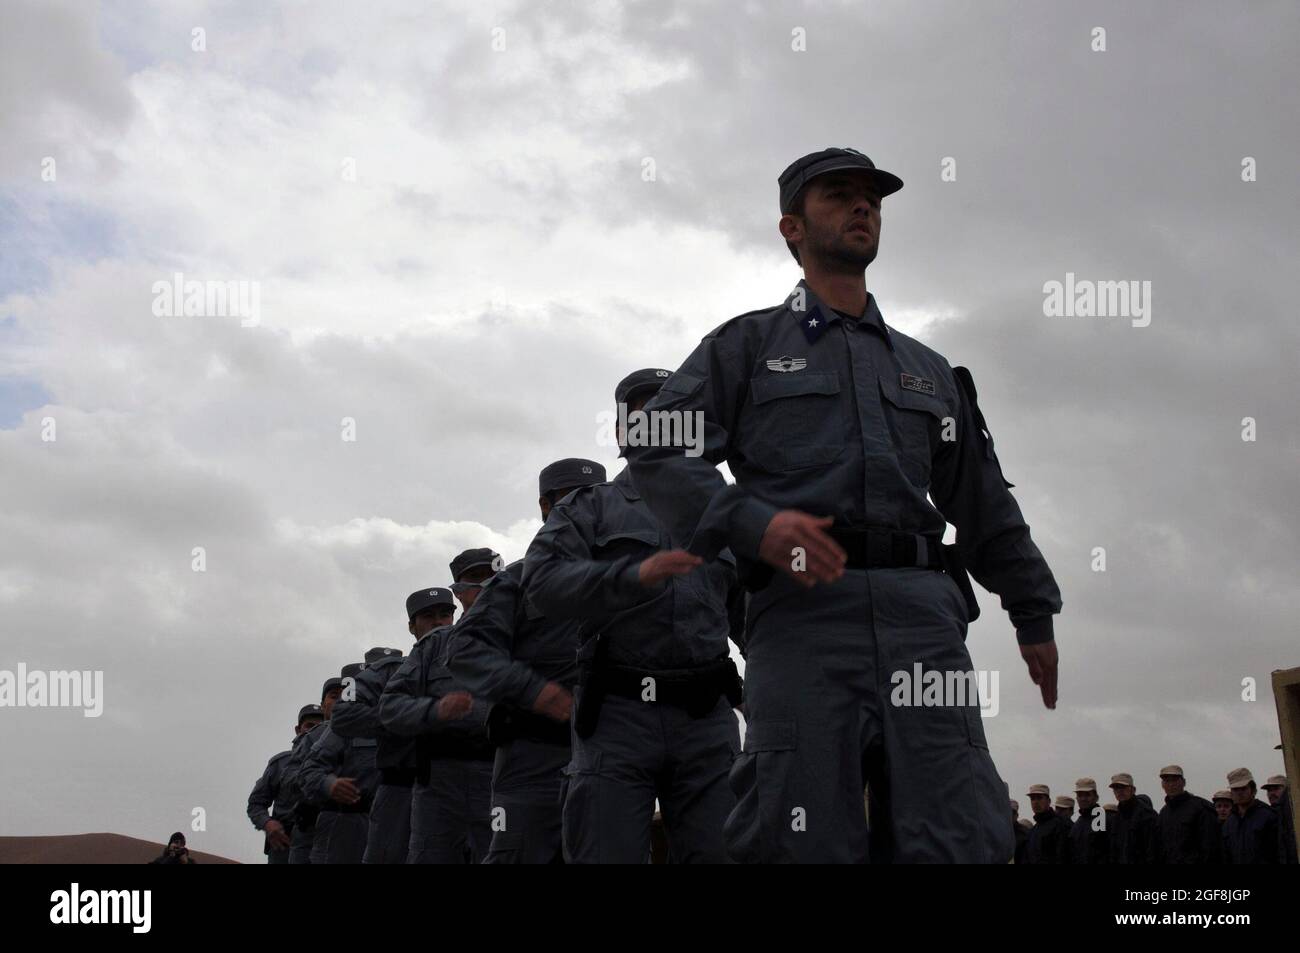 A formation of Afghan National Police recruits march during their graduation ceremony at Forward Operating Base Adraskan, Herat Province, Feb. 3, 2011. They will now join the ranks of the Afghan National Police. Stock Photo